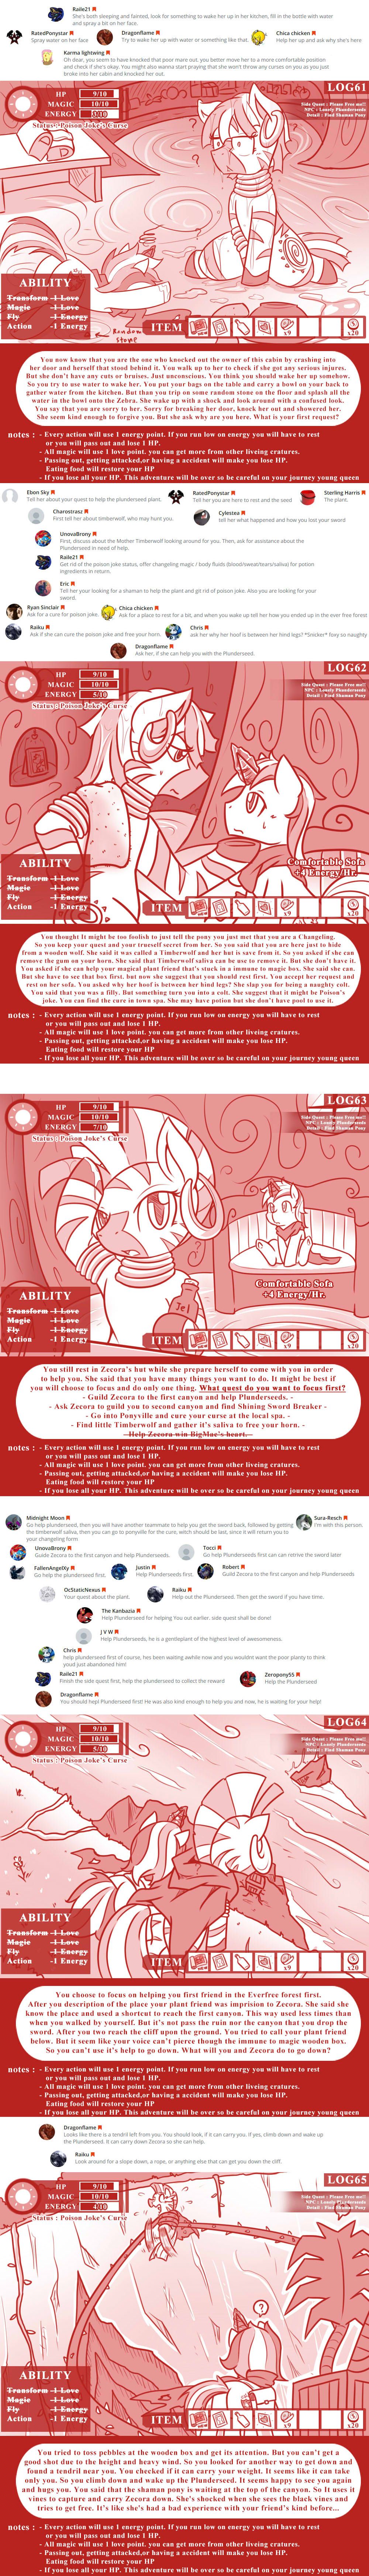 [Vavacung] The Adventure Logs Of Young Queen (My Little Pony: Friendship is Magic) [English] [Ongoing] 14